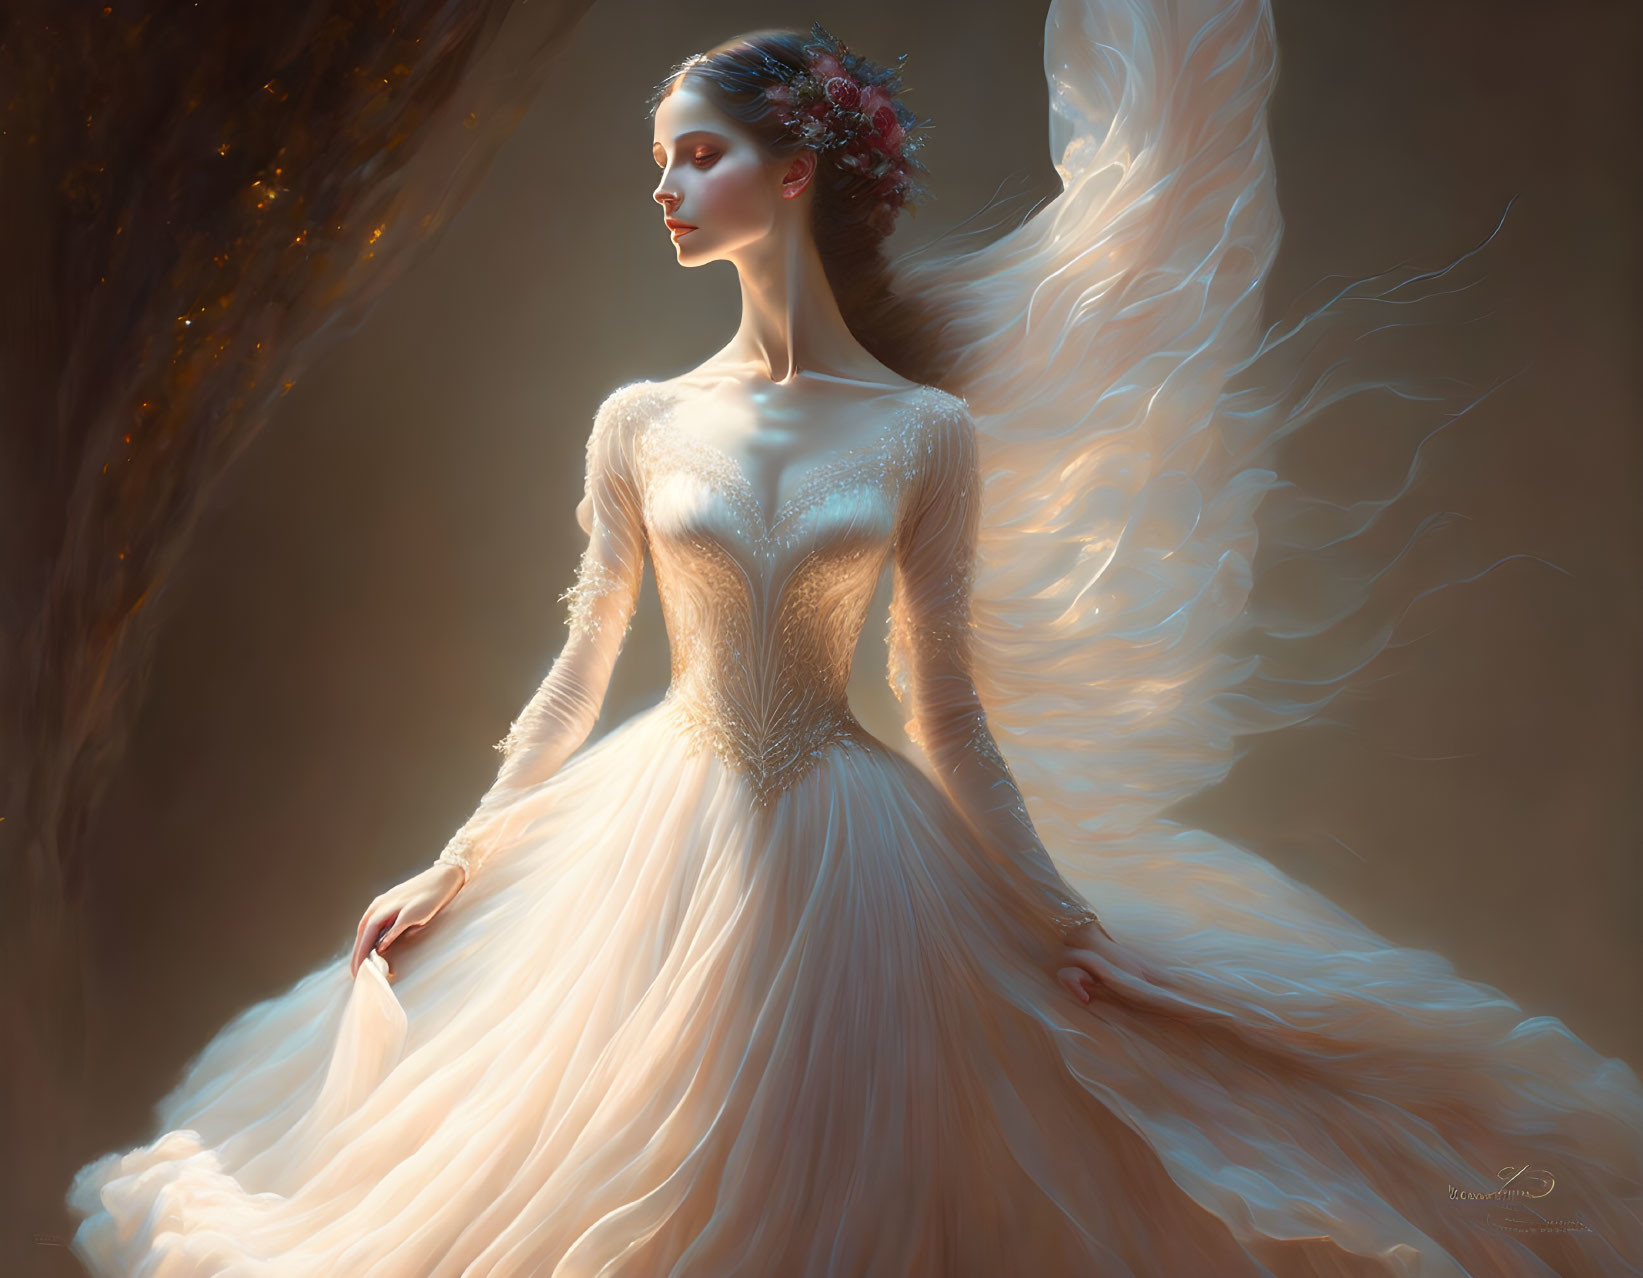 Ethereal woman in elegant beige dress with delicate embellishments